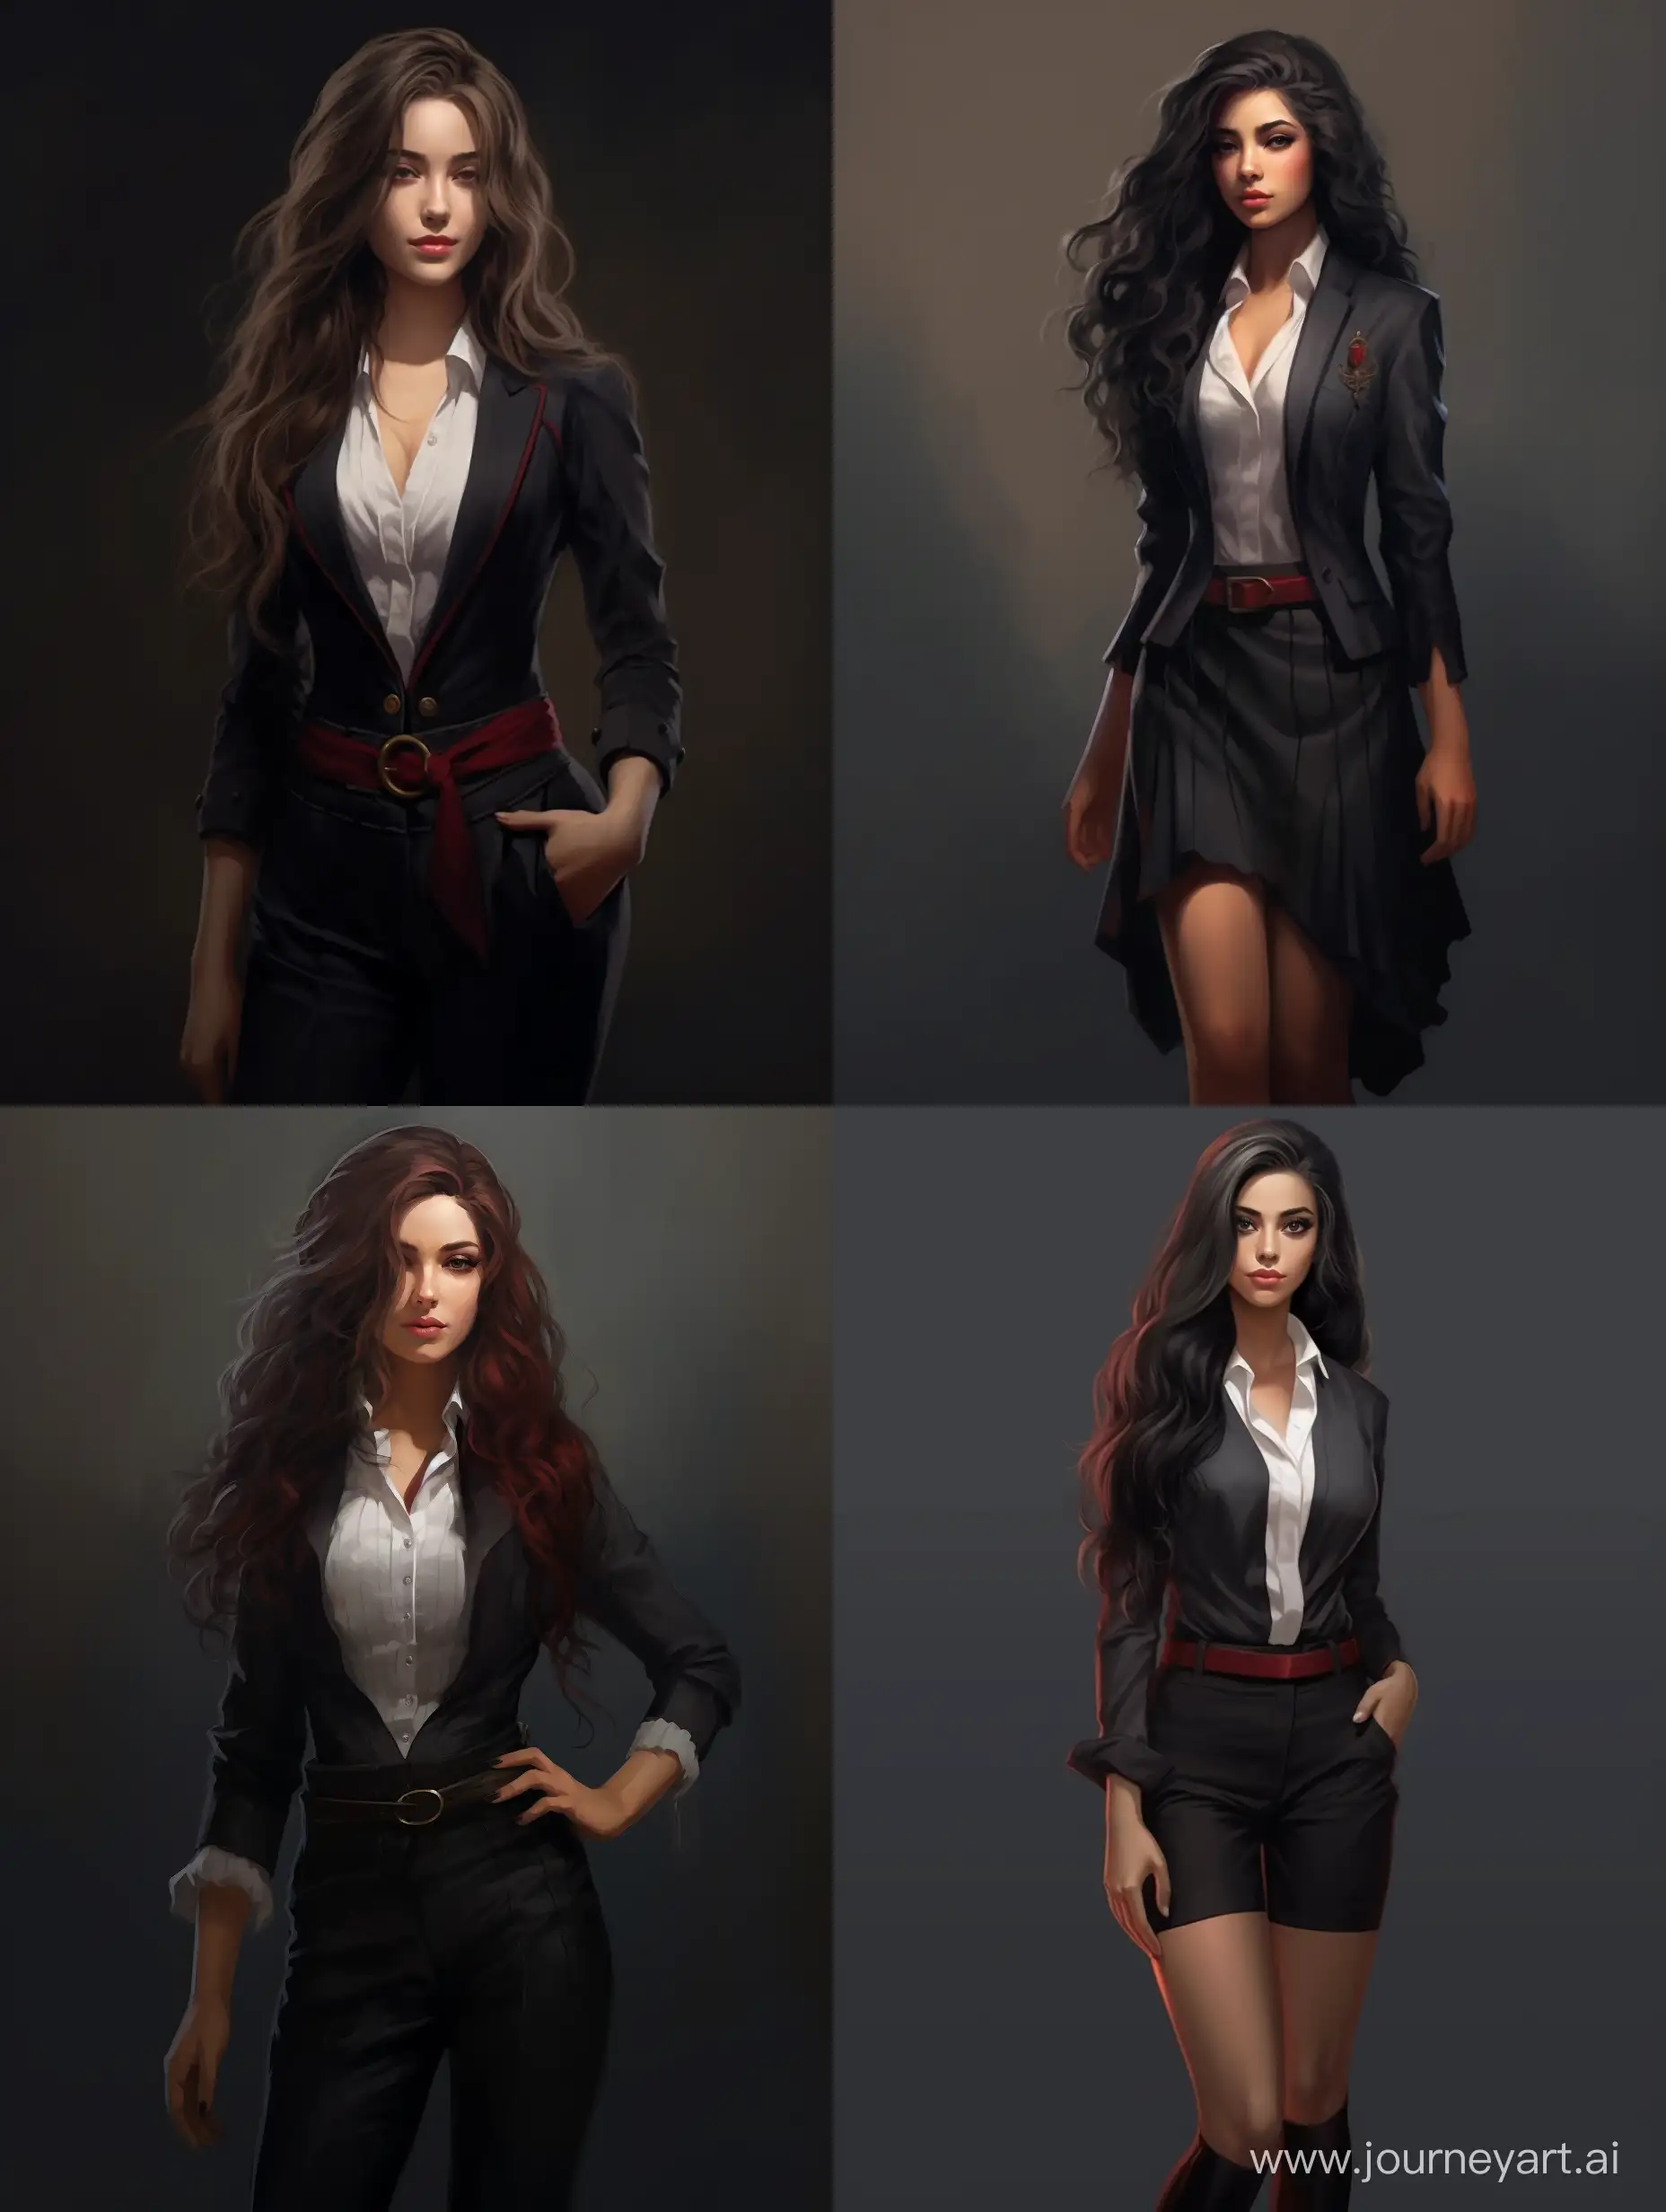 Elegant-Aristocratic-Girl-with-Black-Hair-and-Red-Eyes-in-Business-Attire